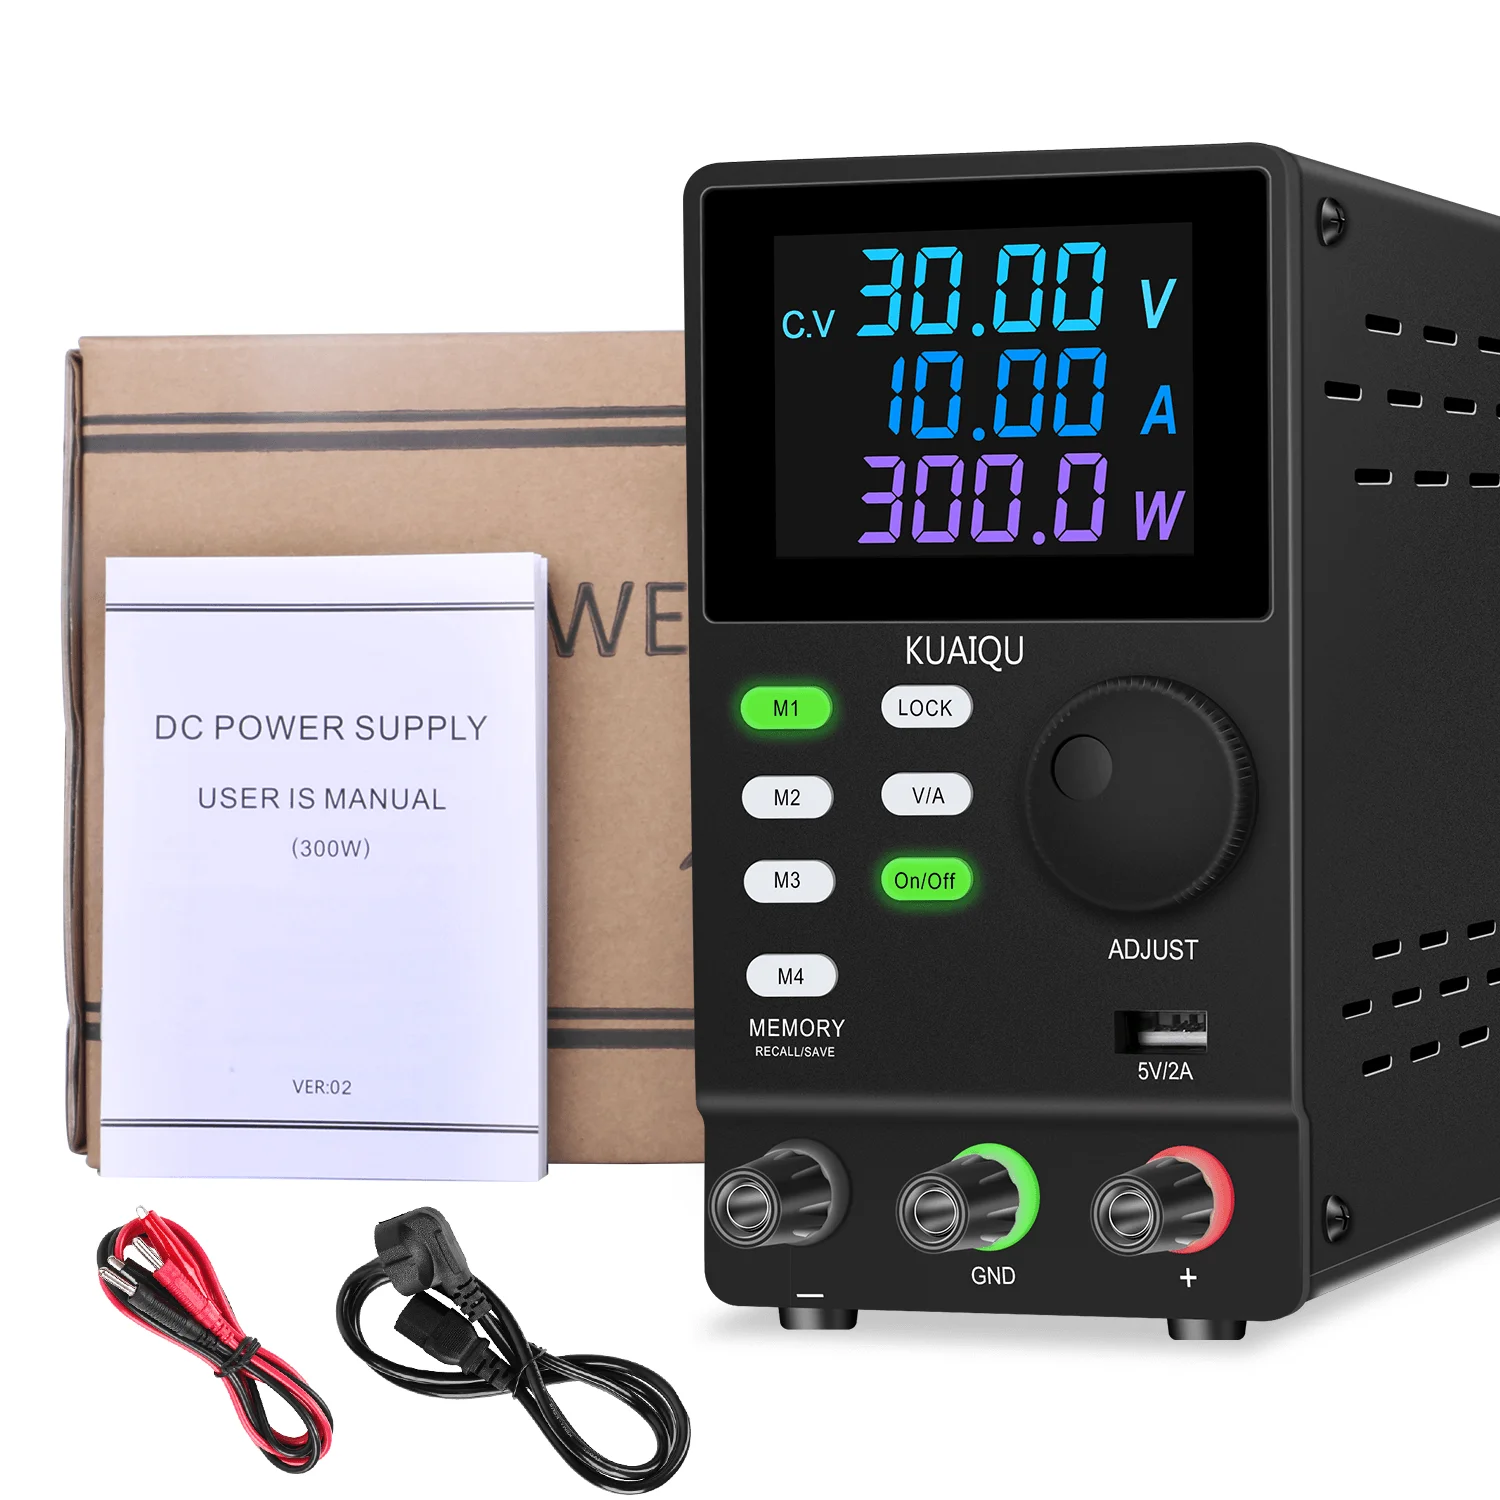 S999446acb632444b9e8c1b29a72cdee1A DC Power Supplies Adjustable Switching Voltage Regulator 30V10A/30V5A Laboratory Power Supply USB Interface LED Drone Charging